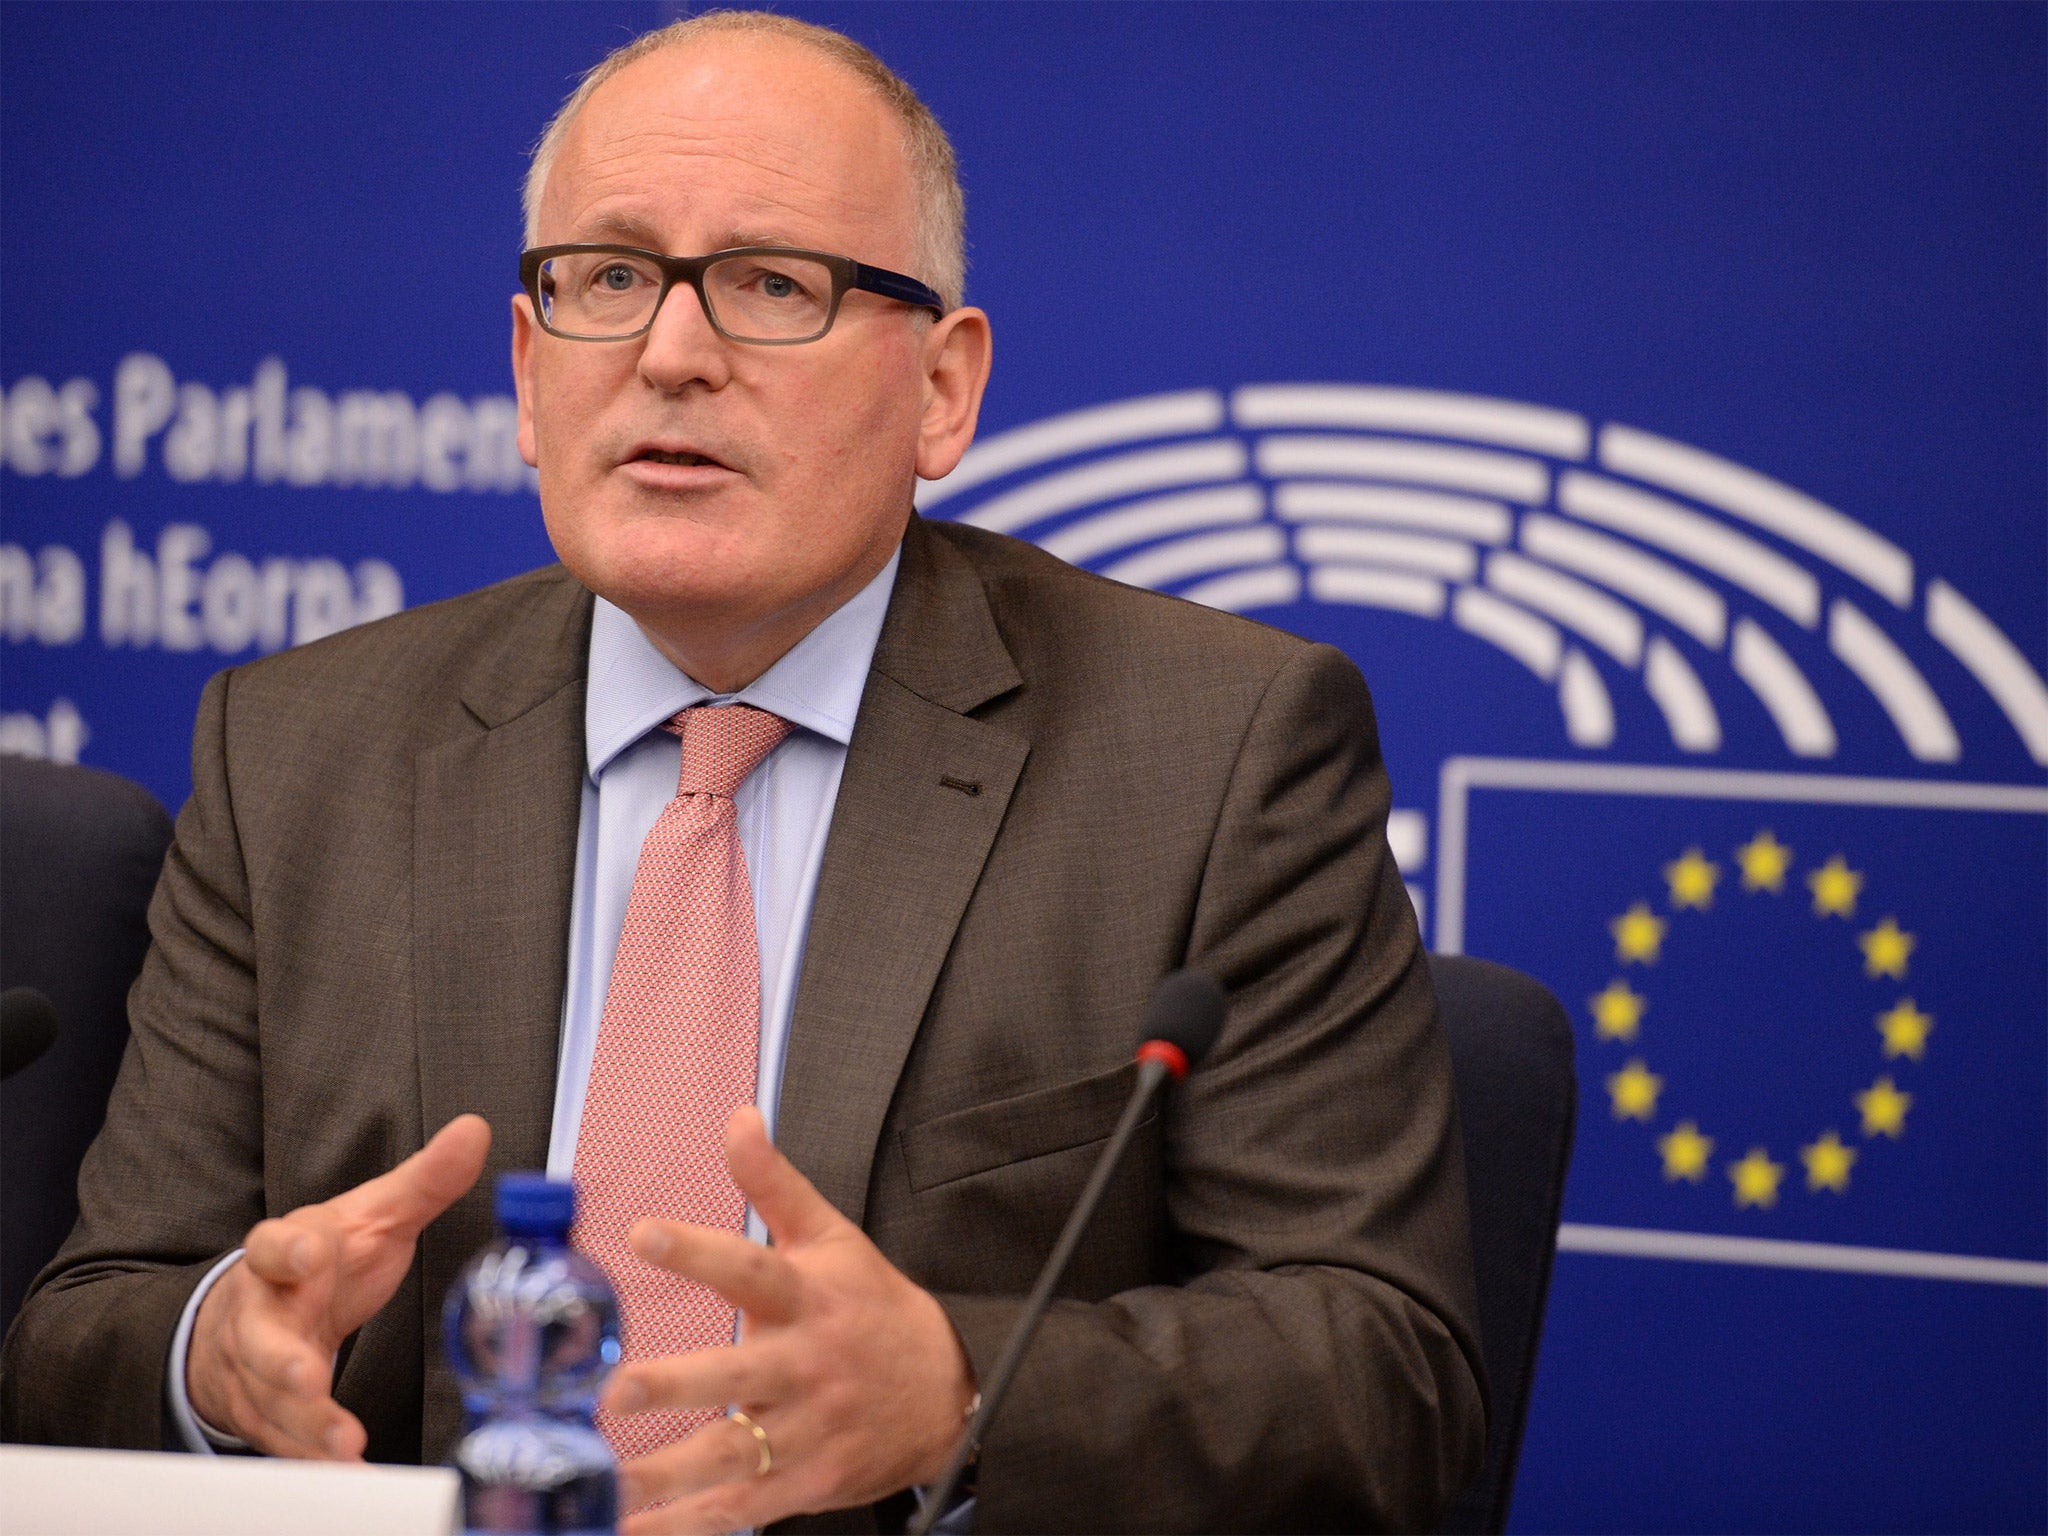 Vice-president of European Commission Frans Timmermans speaks during a press conference in Strasbourg on Tuesday